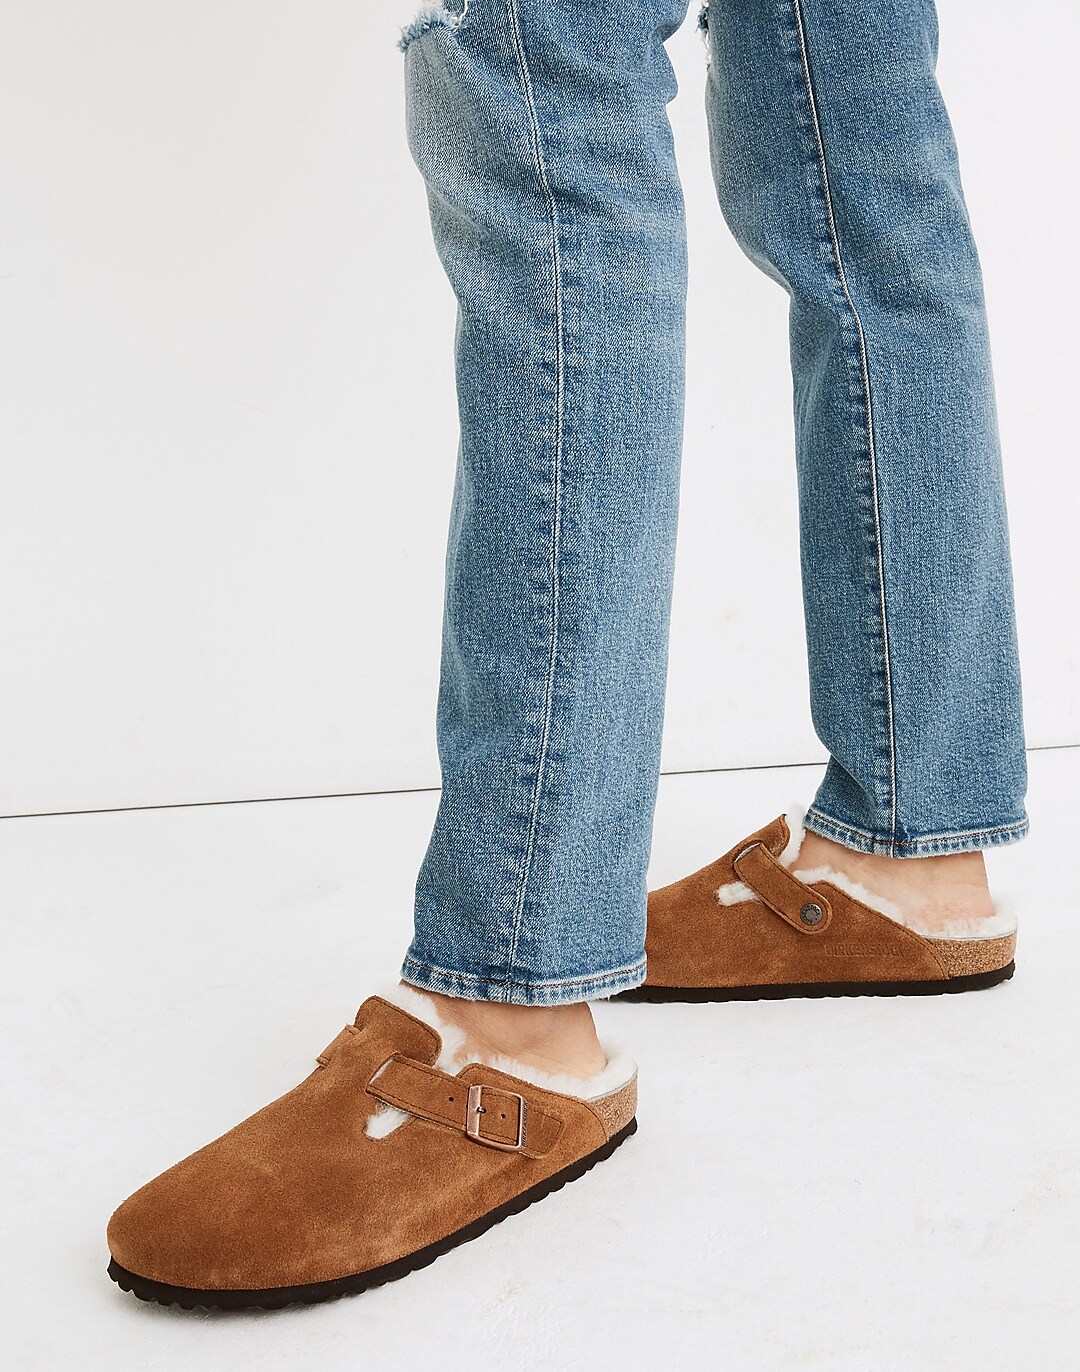 Suede Boston Clogs in Shearling